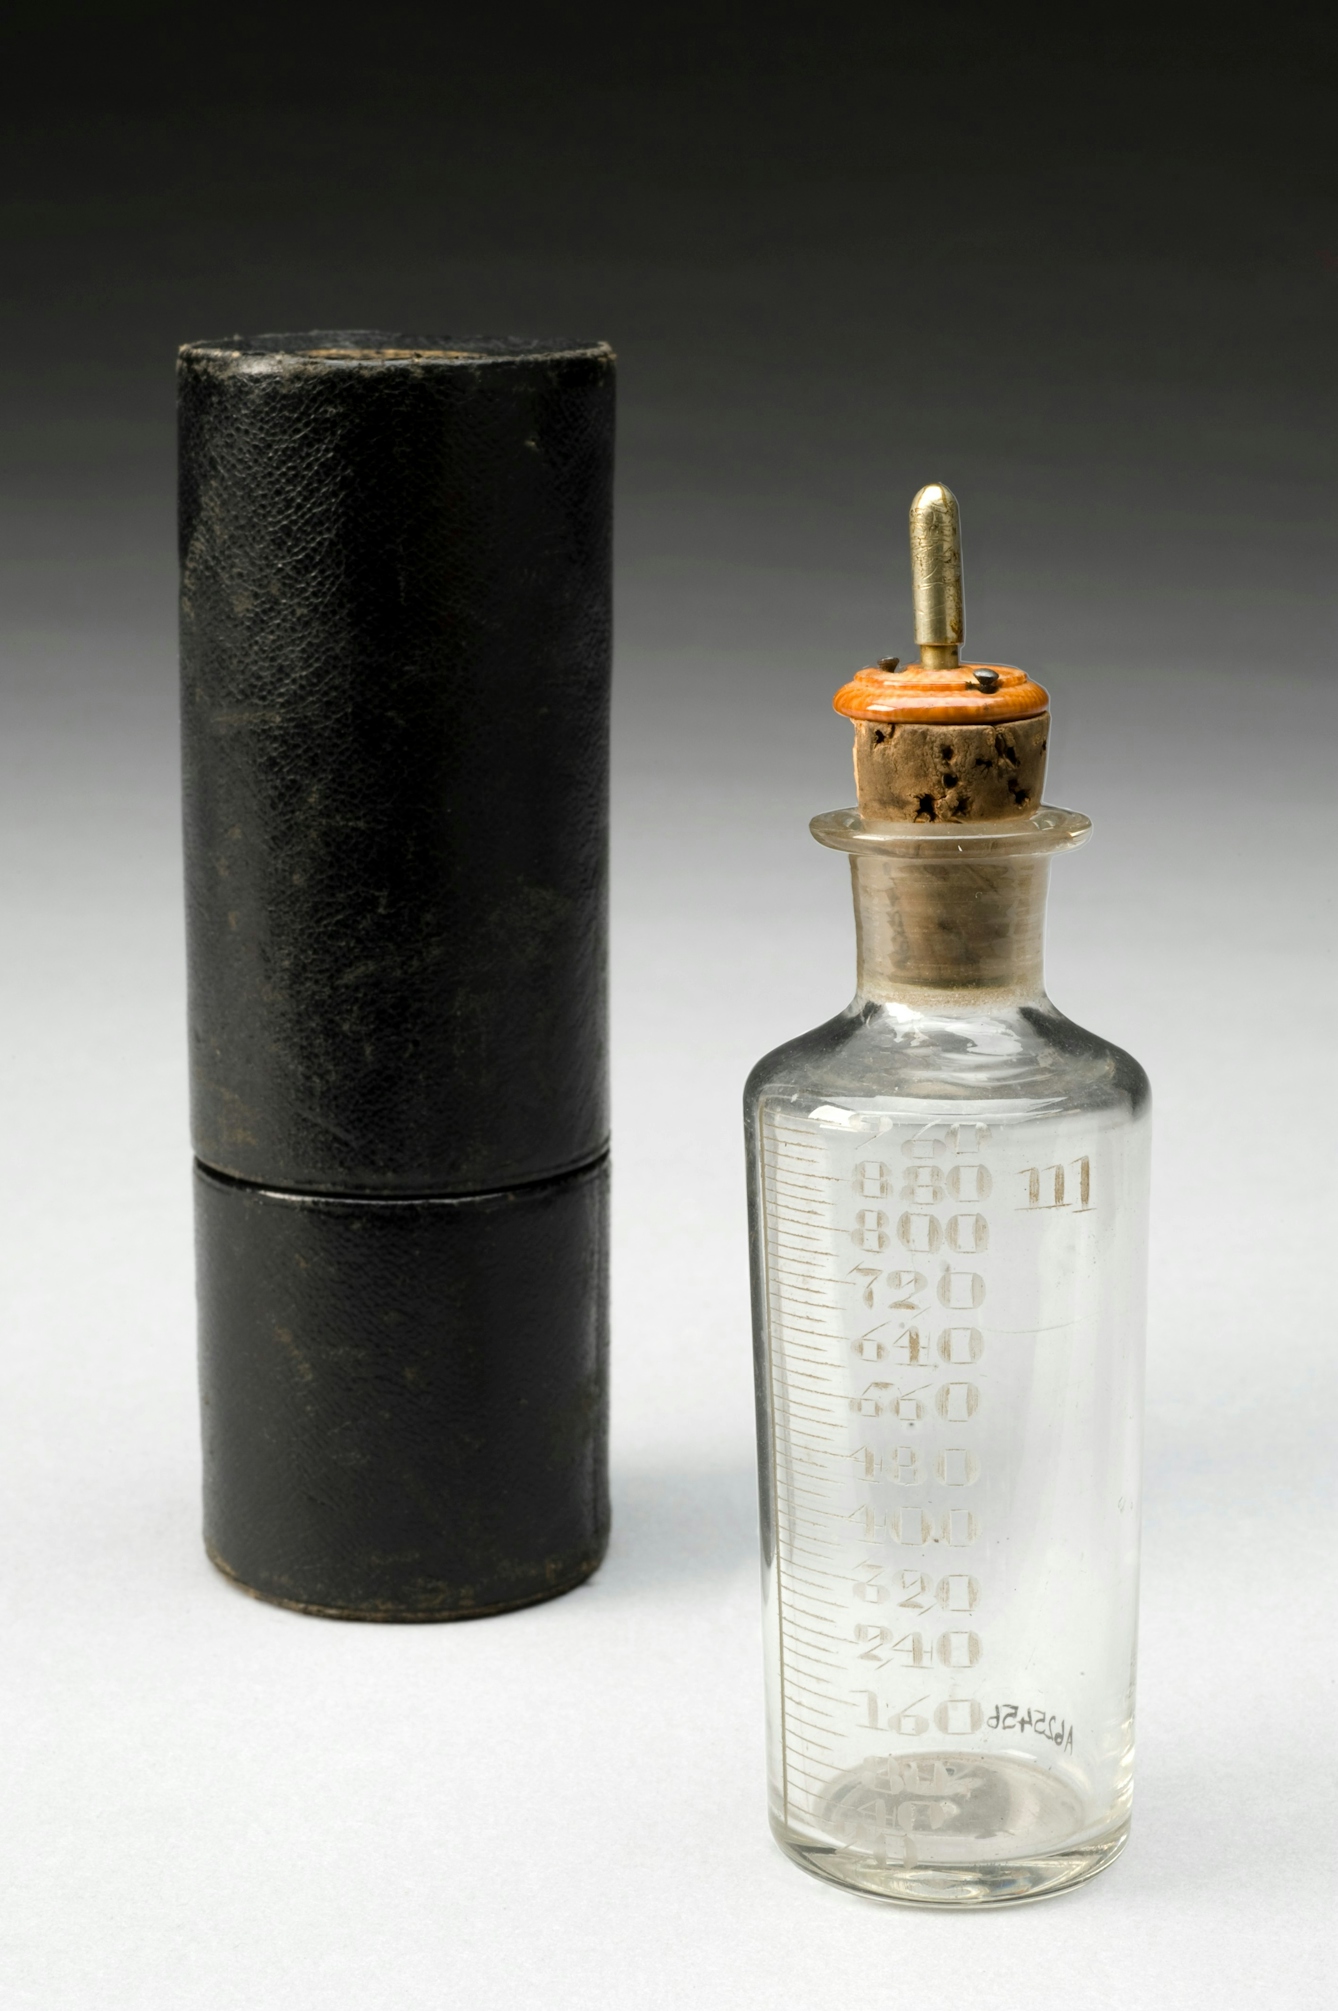 Colour photograph of a glass bottle and its case